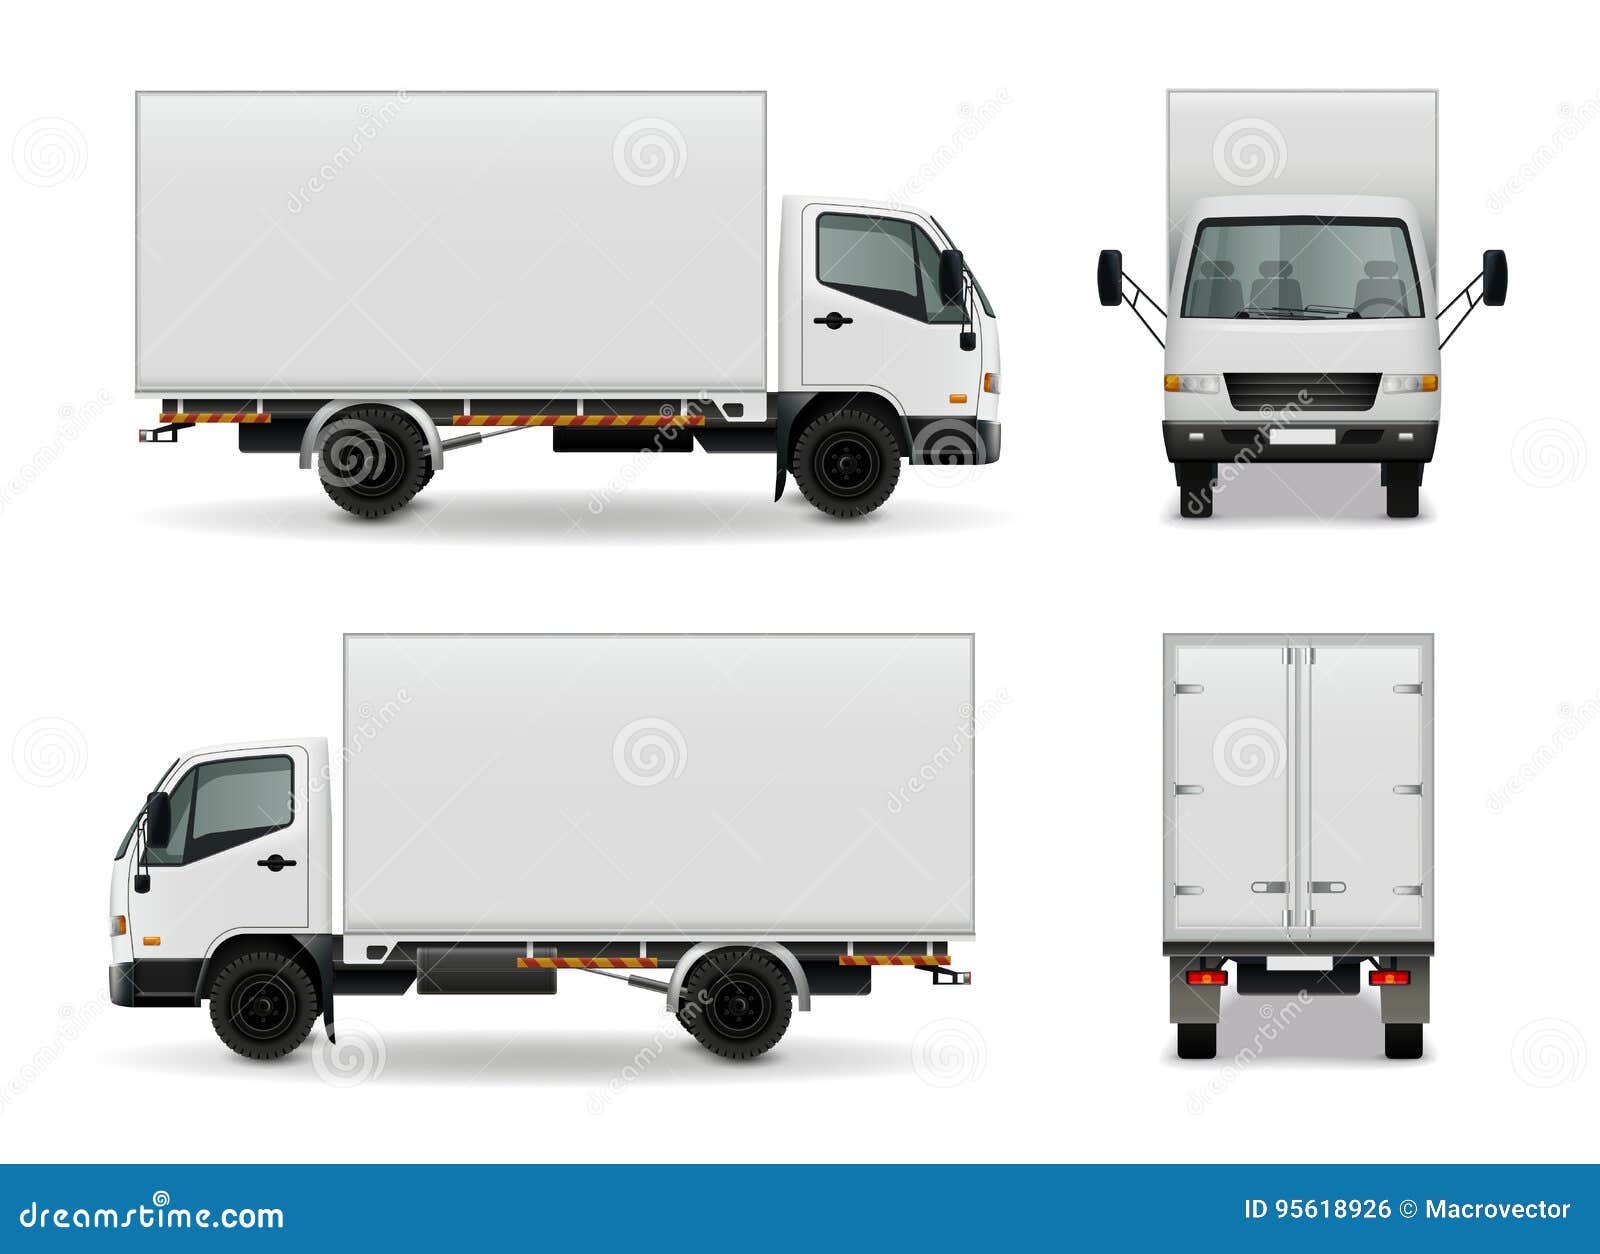 lorry realistic advertising mockup